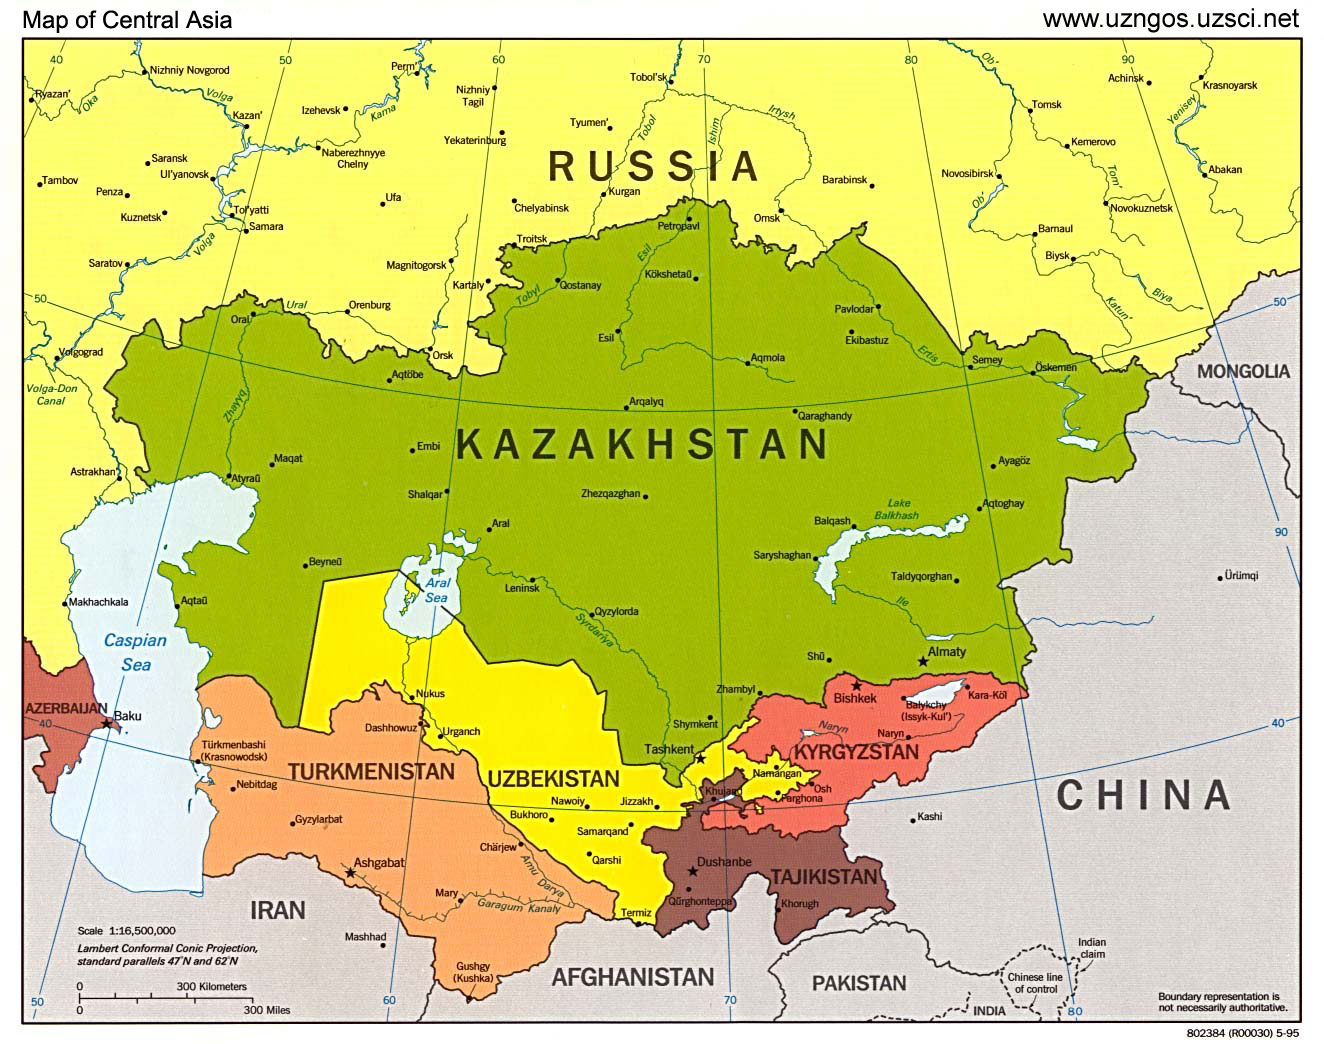 Central Asia Countries And Regions Map | Map of Atlantic Ocean Area